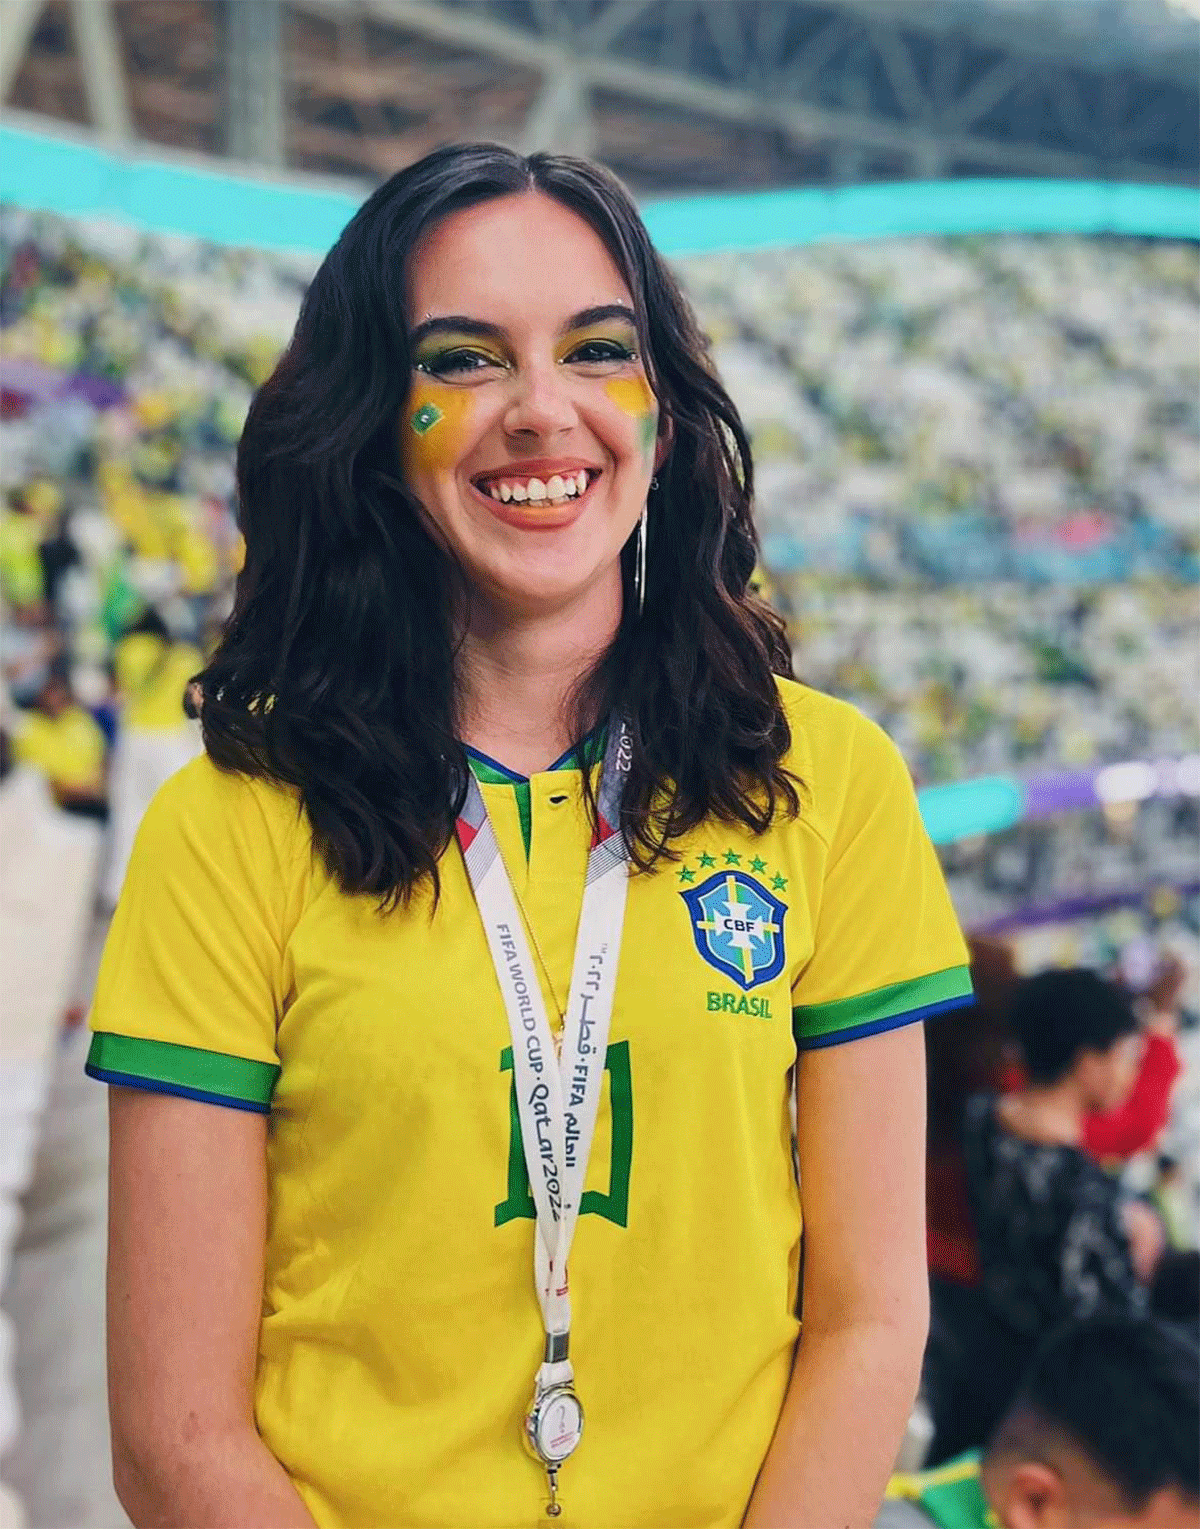 The 19-year-old Ellie Molloson said that the lack of alcohol had contributed to a less bawdy atmosphere around the games at the World Cup, but in her opinion it was mostly cultural.